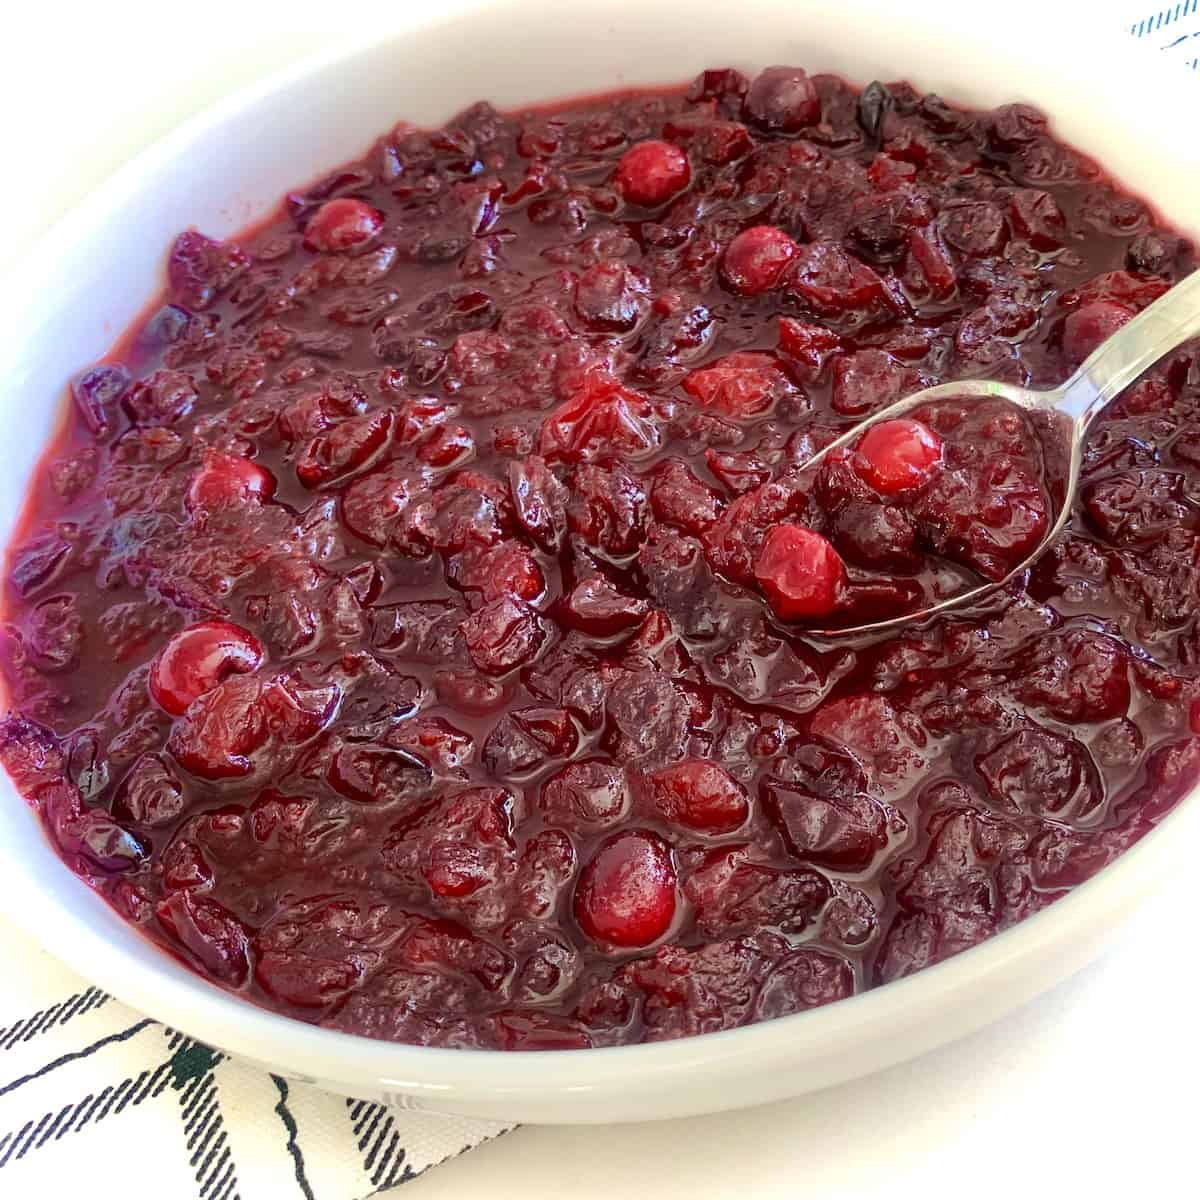 Spoon scooping cranberry sauce out of a white bowl on top of a black and white plaid dishtowel.